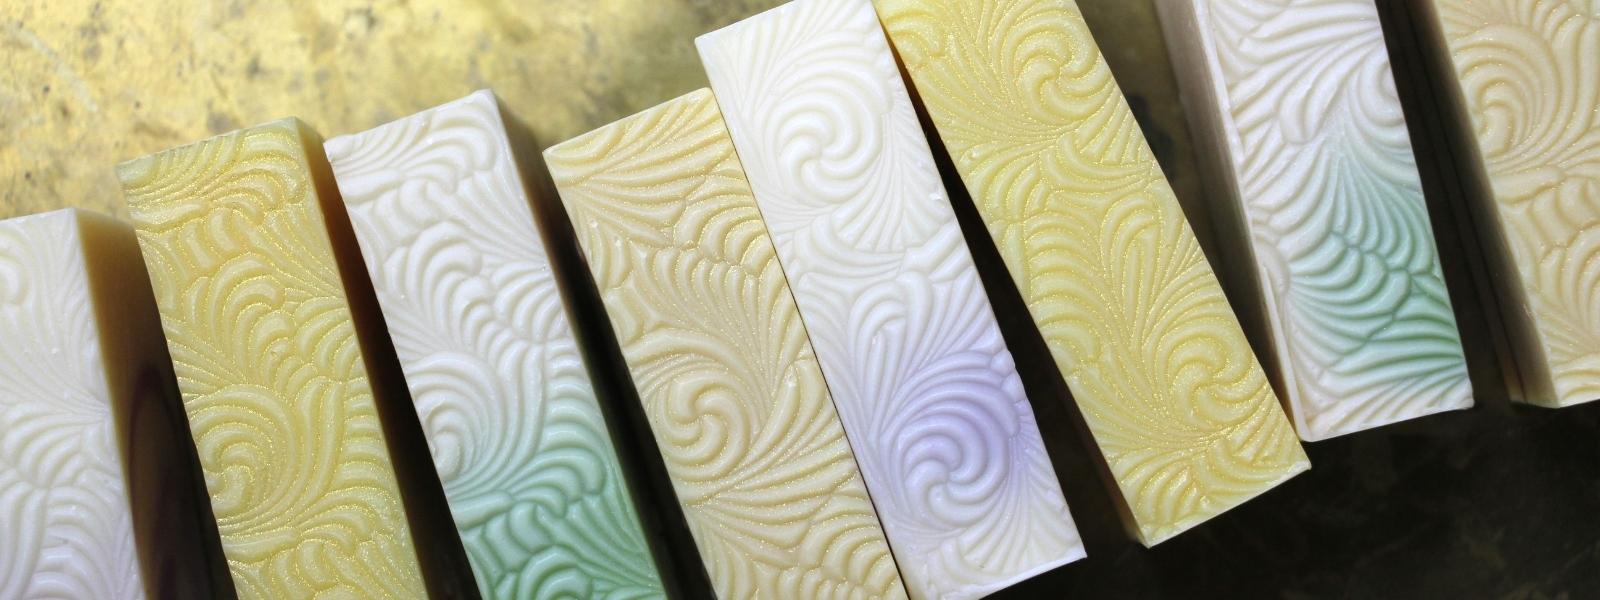 Handcrafted Soap | Gilded Olive Apothecary, Long Island New York